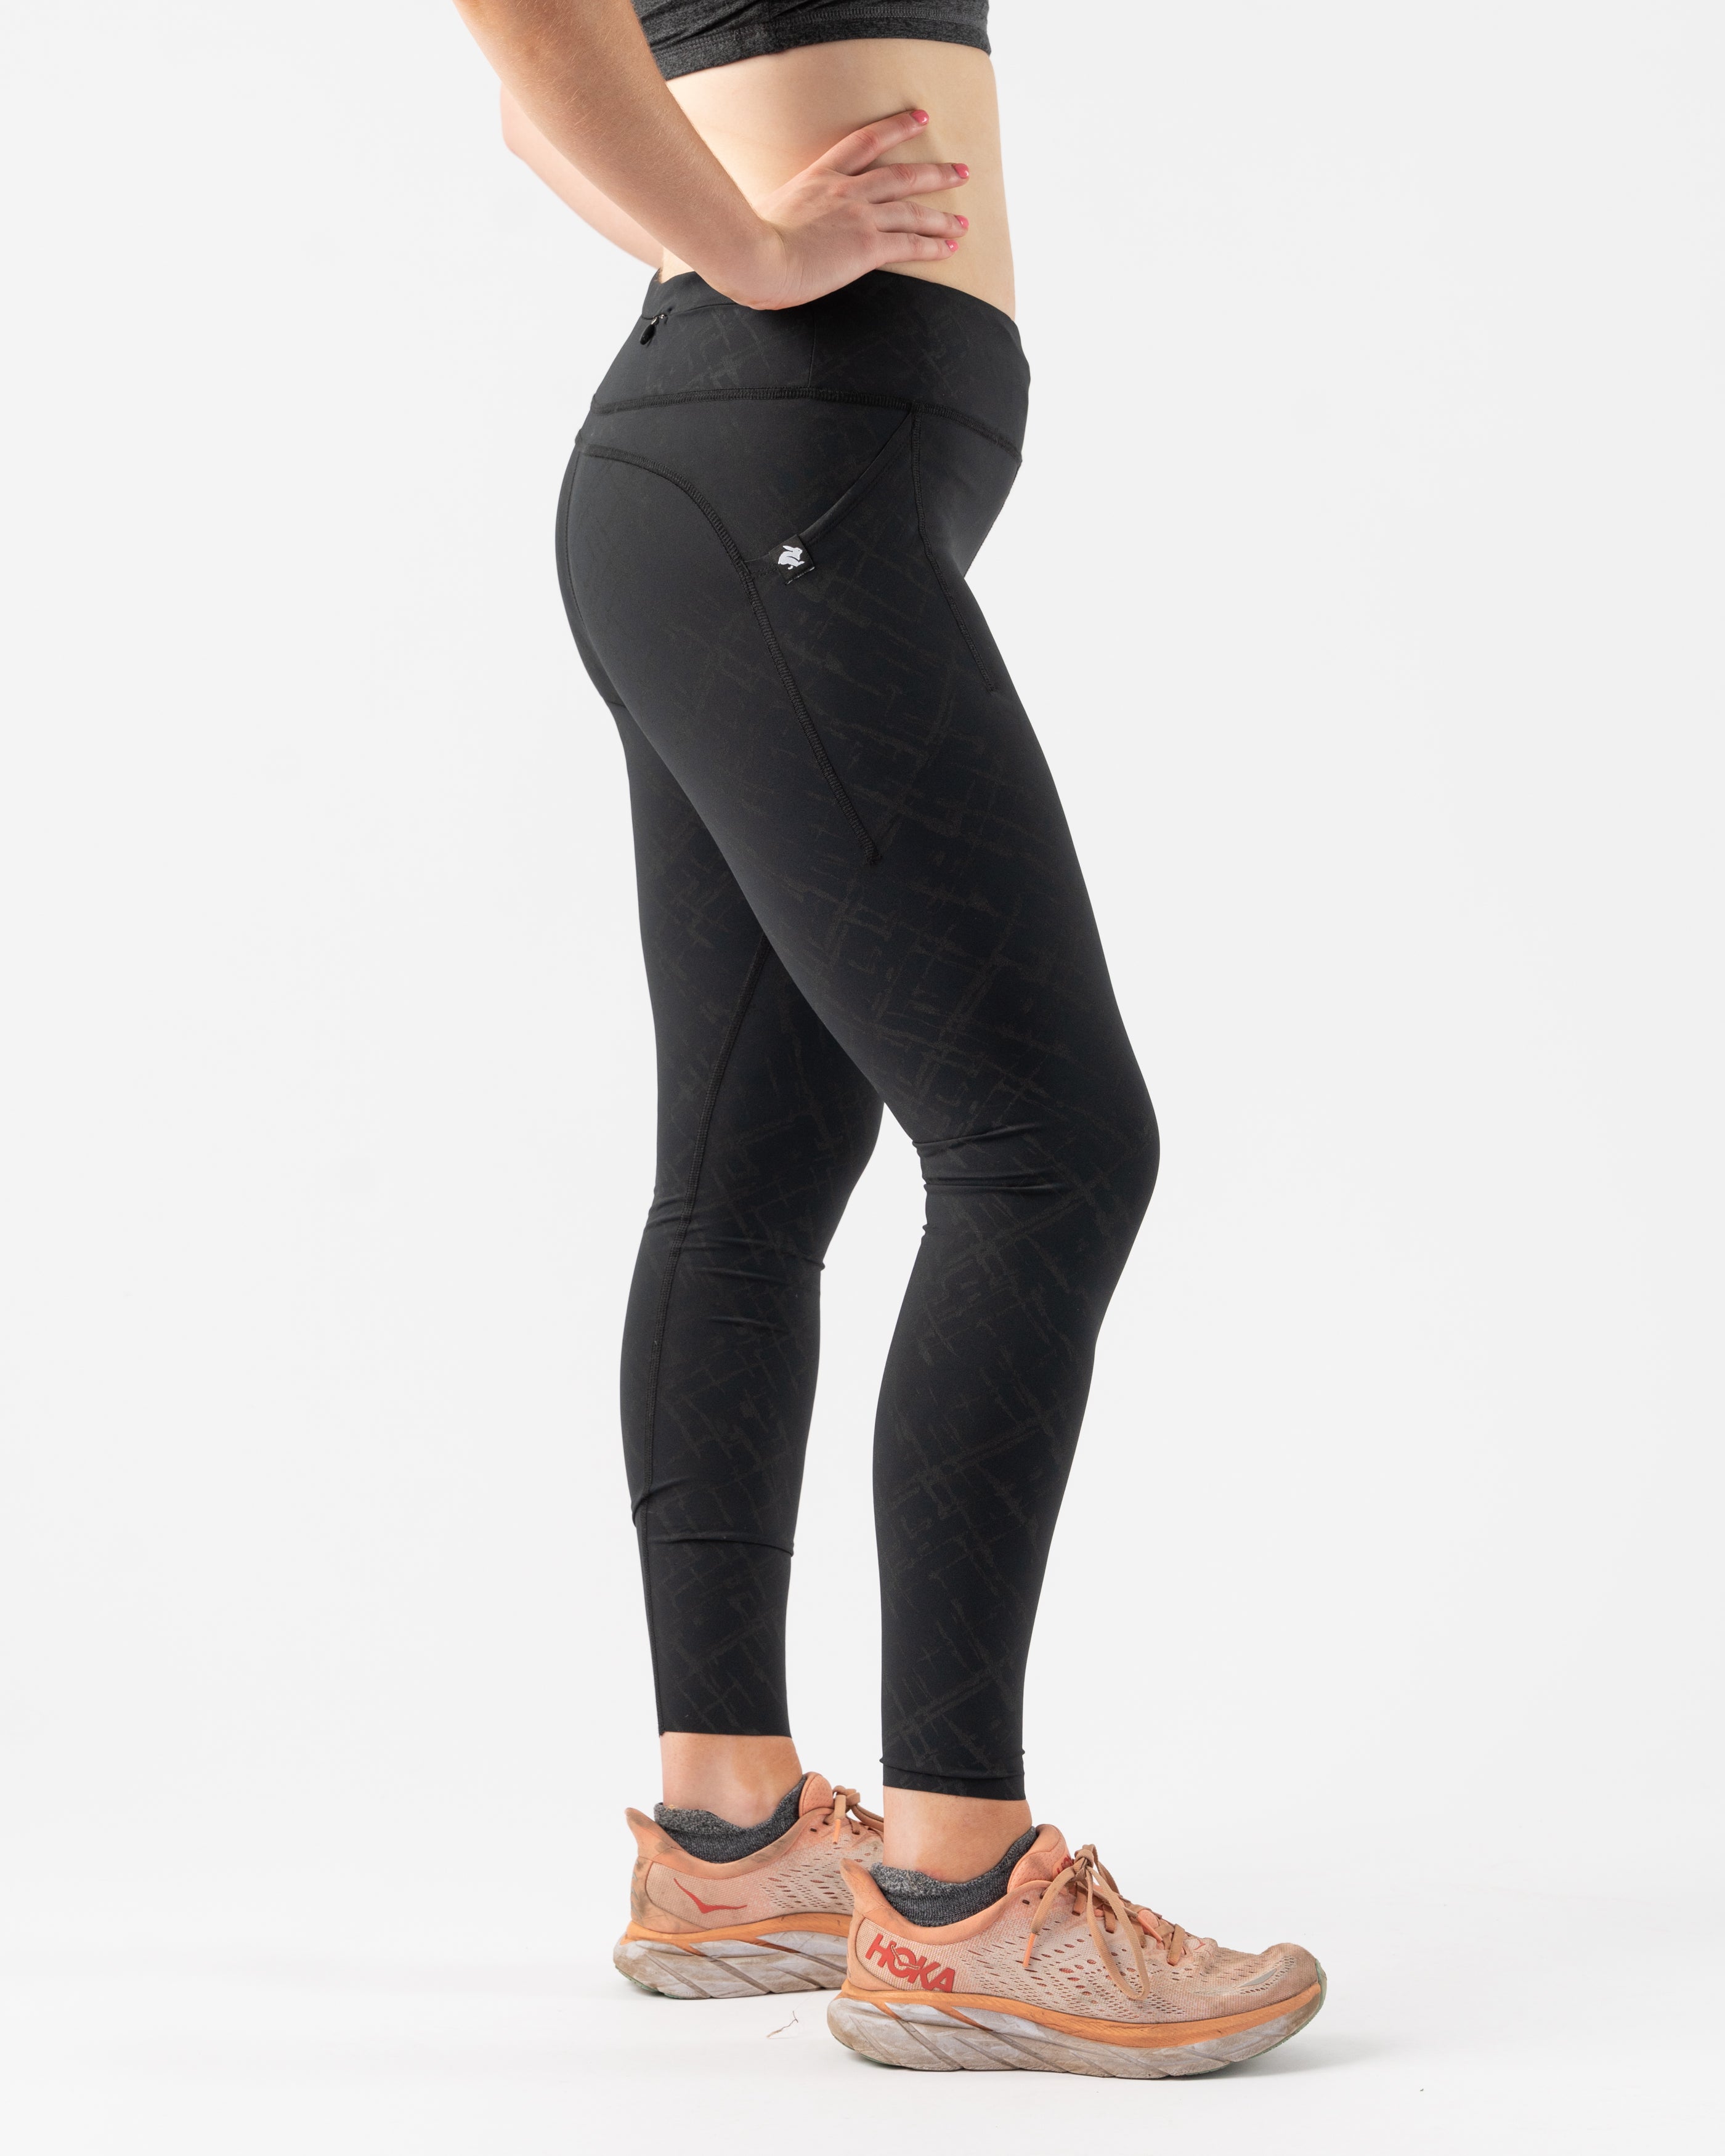 LULULEMON Fast and Free 7/8 Tight 25 (Black (Non-Reflective), 4)